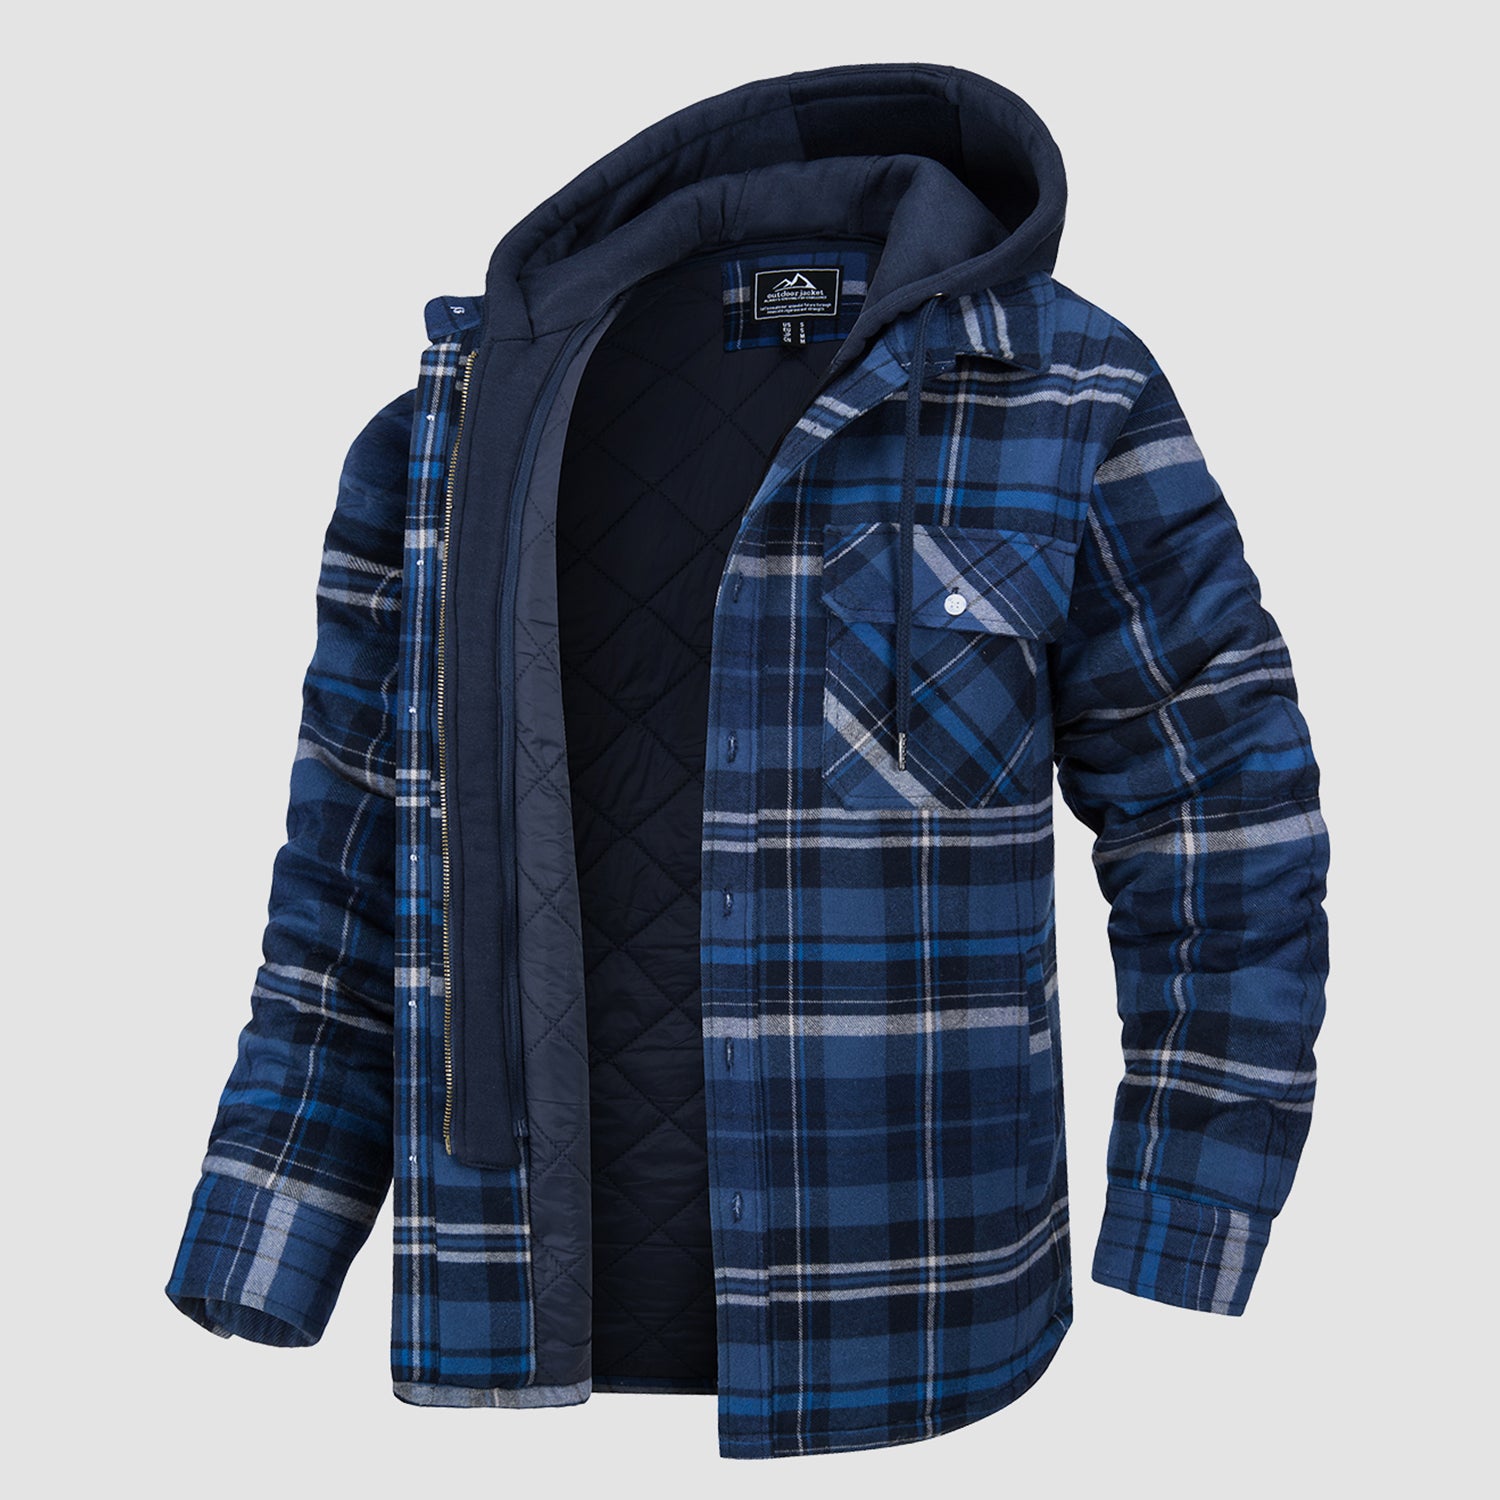 Men's Hooded Shirts Sweatshirt Thick Plaid Printed Quilted Hooded Jacket  Cotton-Padded Warm Blouse Tops Coat Blue Medium : : Clothing,  Shoes & Accessories